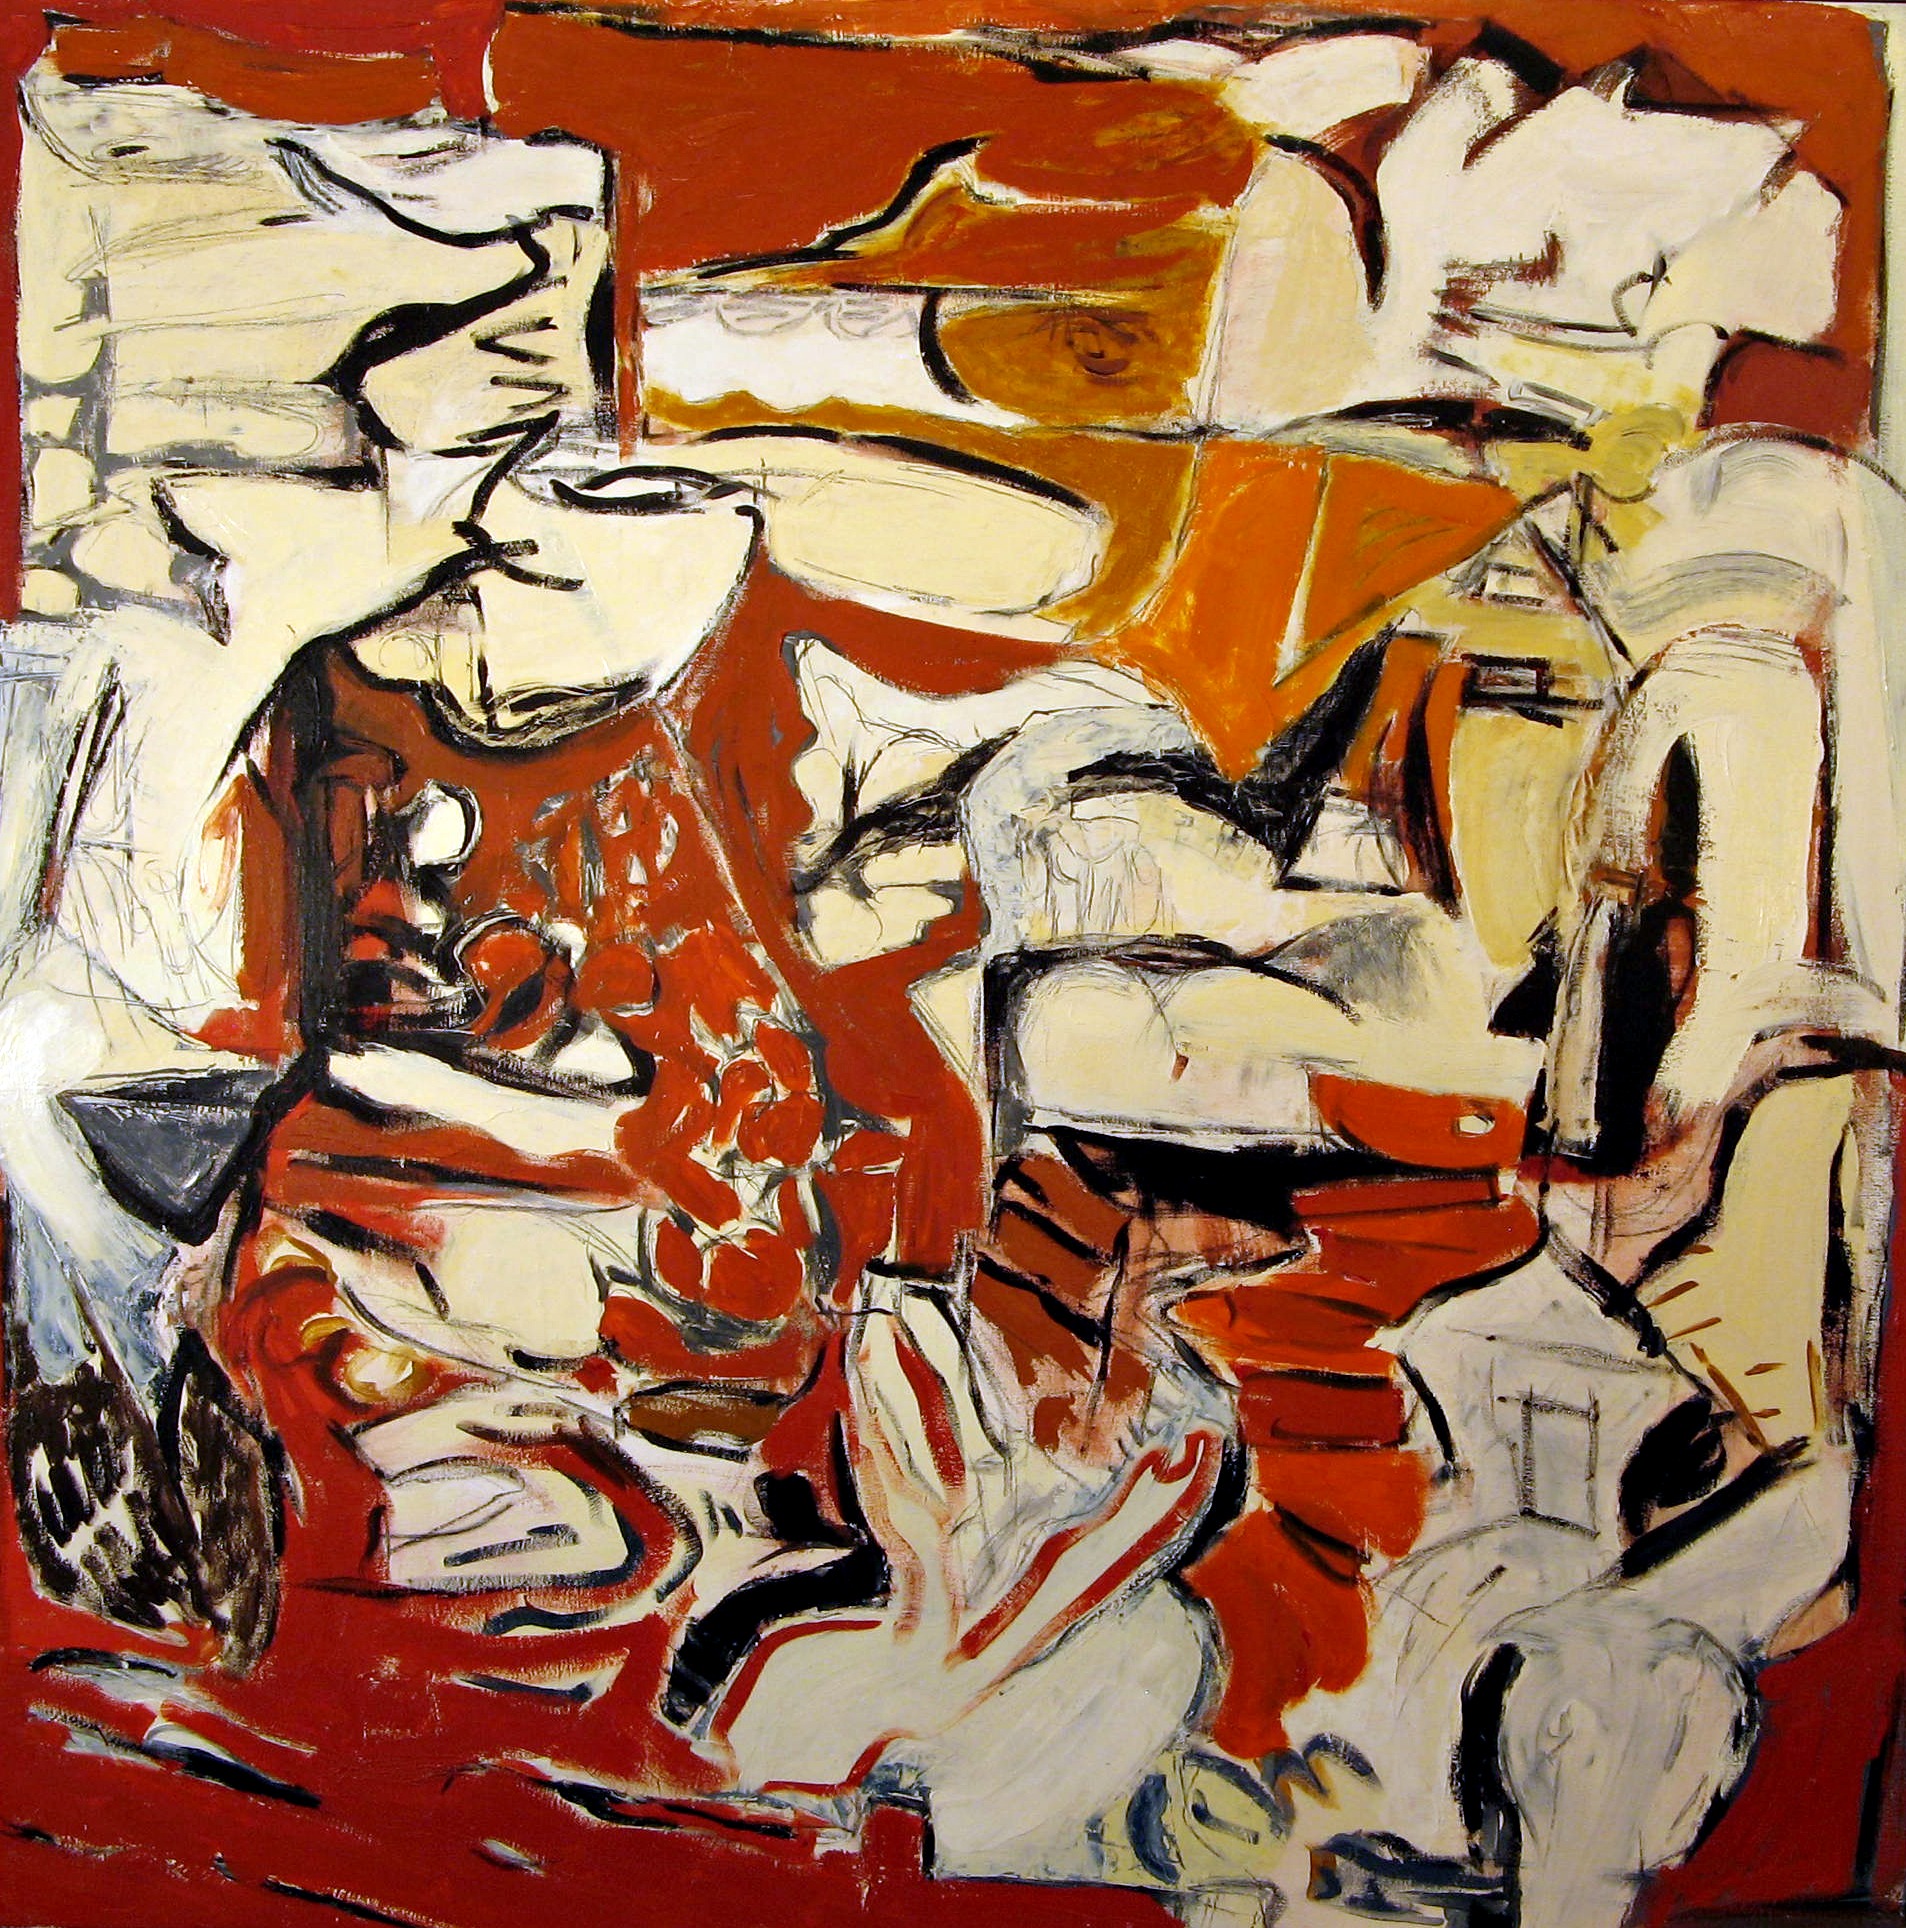  Osterman,  Red Friday , Oil on canvas, 44x44 